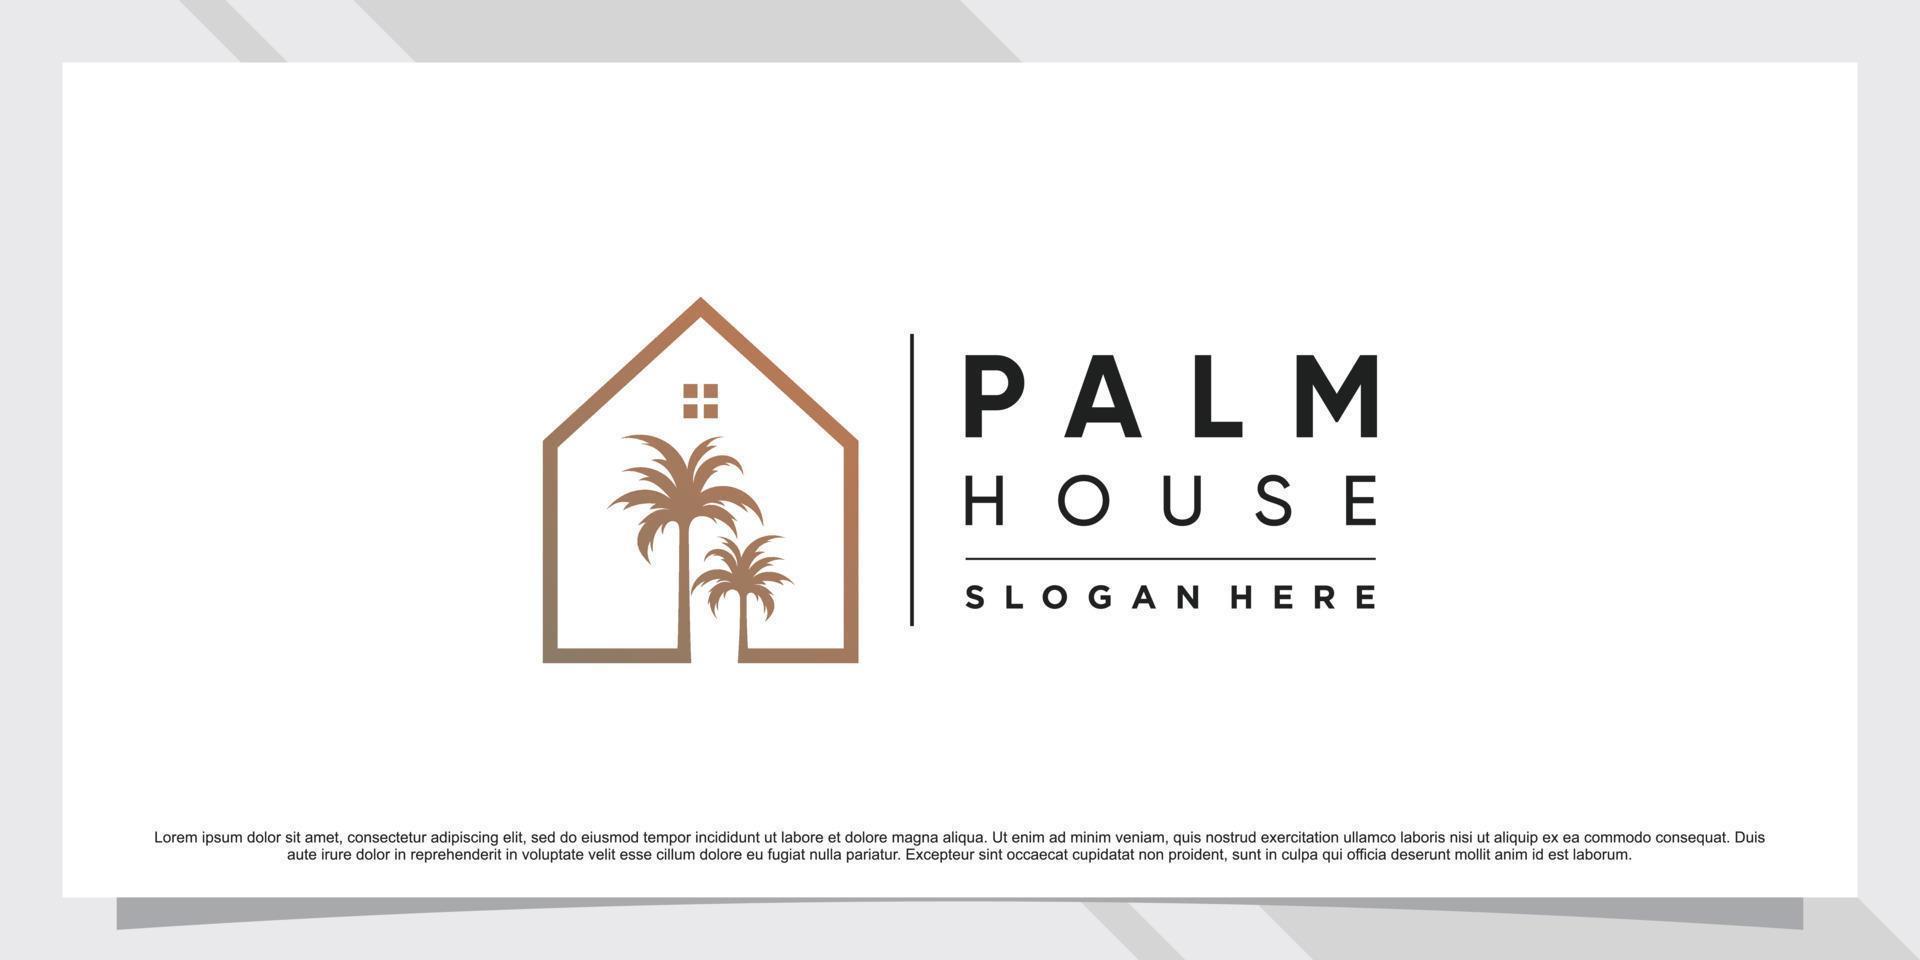 Palm tree and house logo design illustration with creative concept Premium Vector